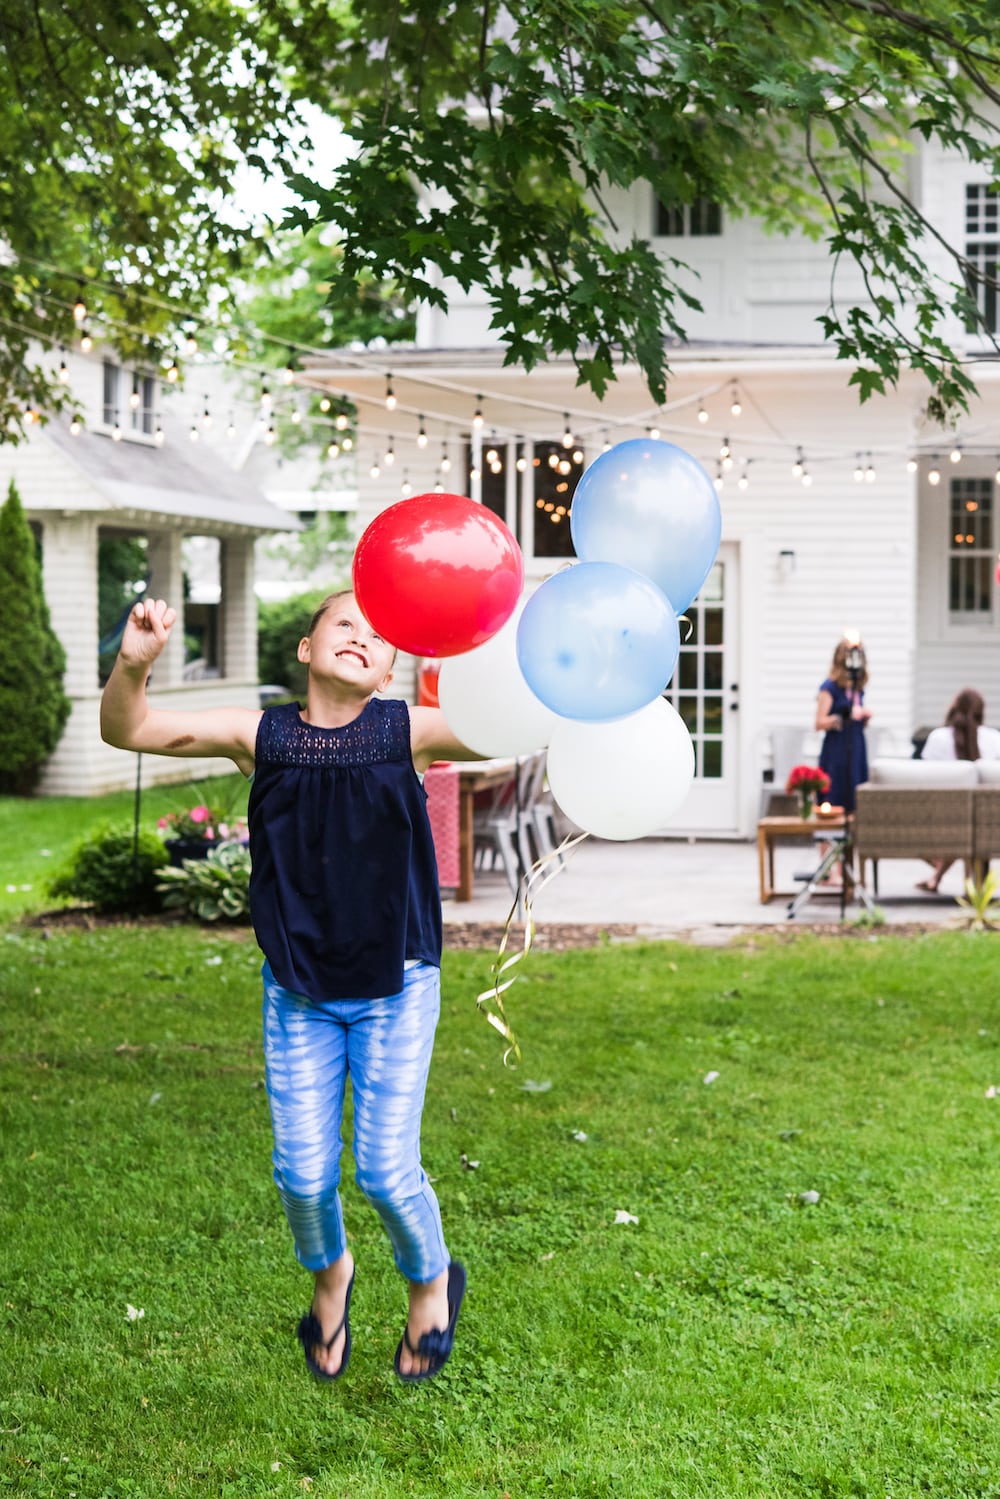 Host an Americana Inspired 4th of July Party | Get ideas for 4th of July desserts, entertaining tips, 4th of July decorations, 4th of July party ideas and more from @cydconverse